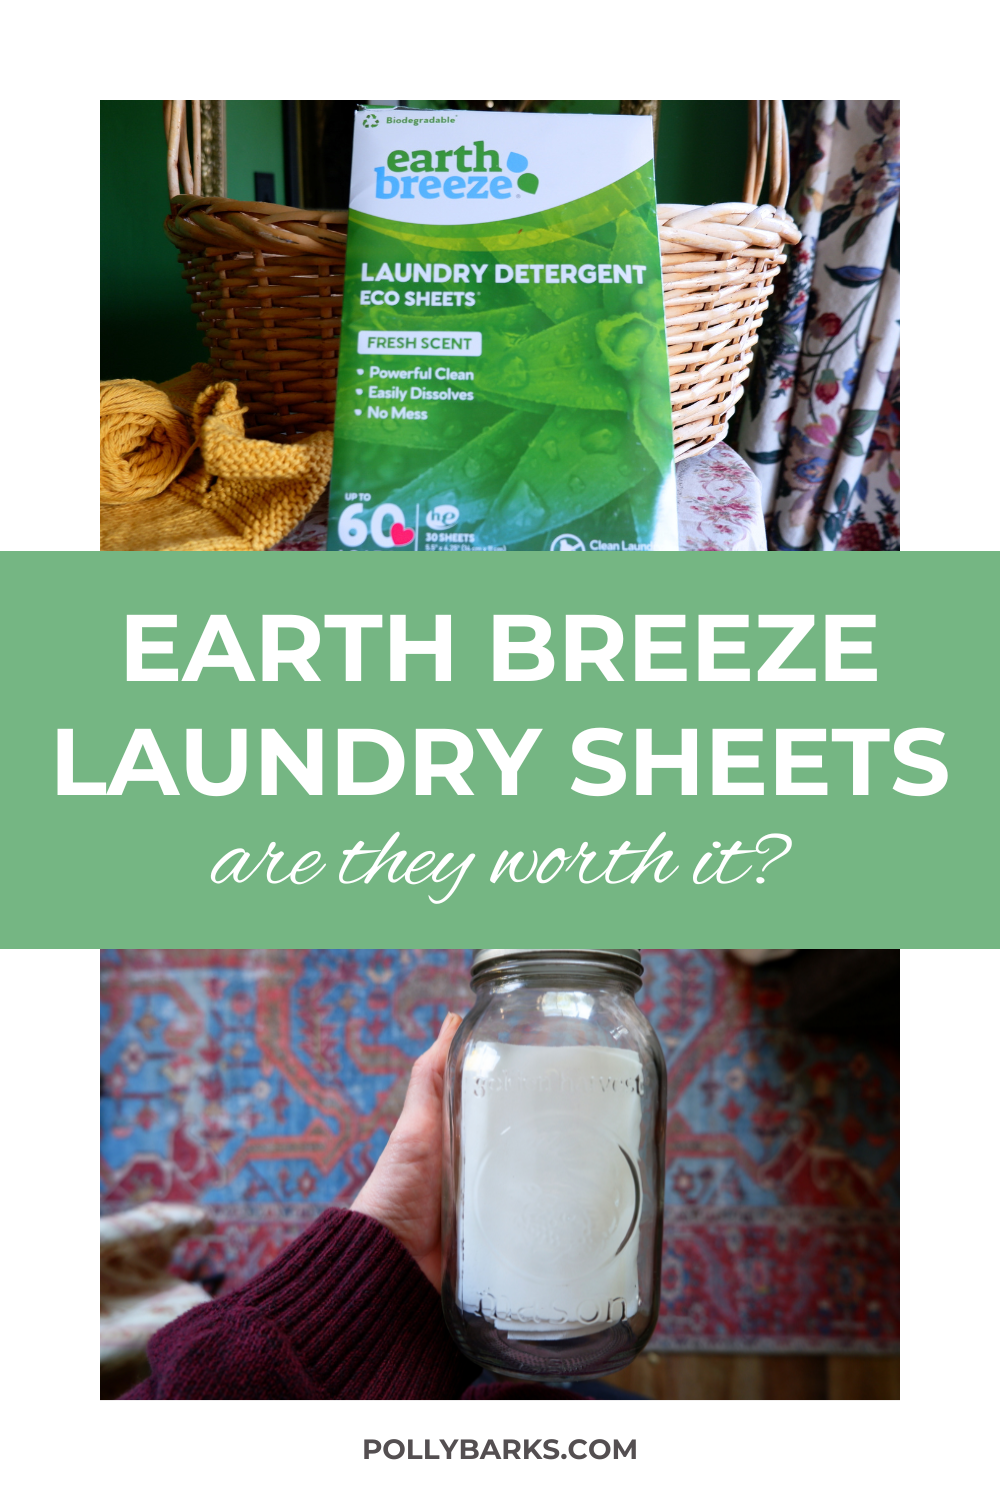 A hard look at Earth Breeze laundry sheets – Rinexii